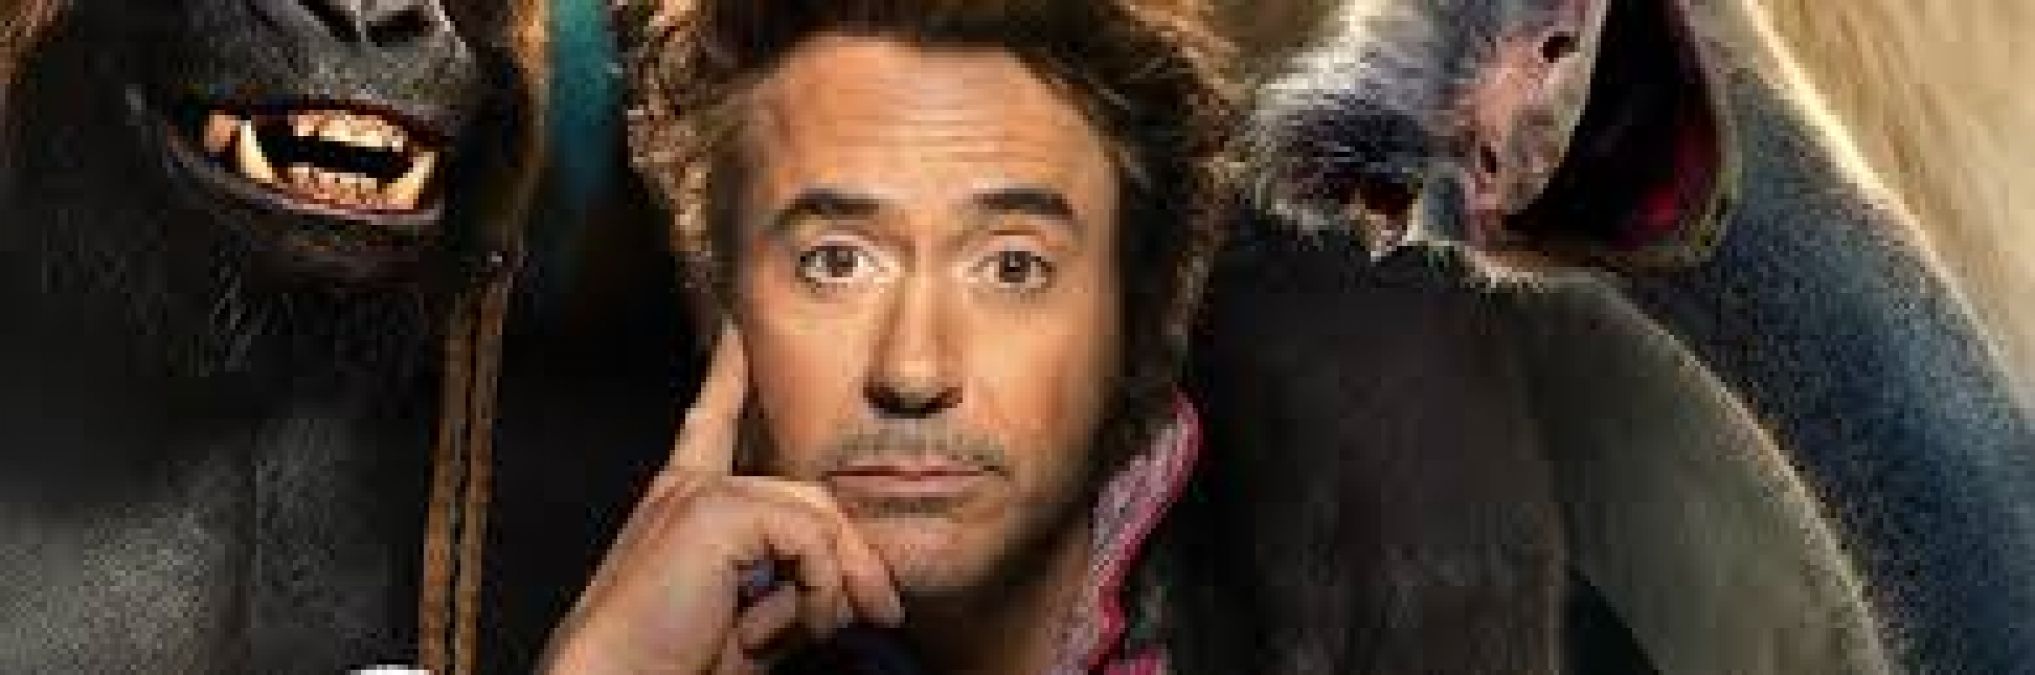 Robert Downey will soon bring the animal world to theaters